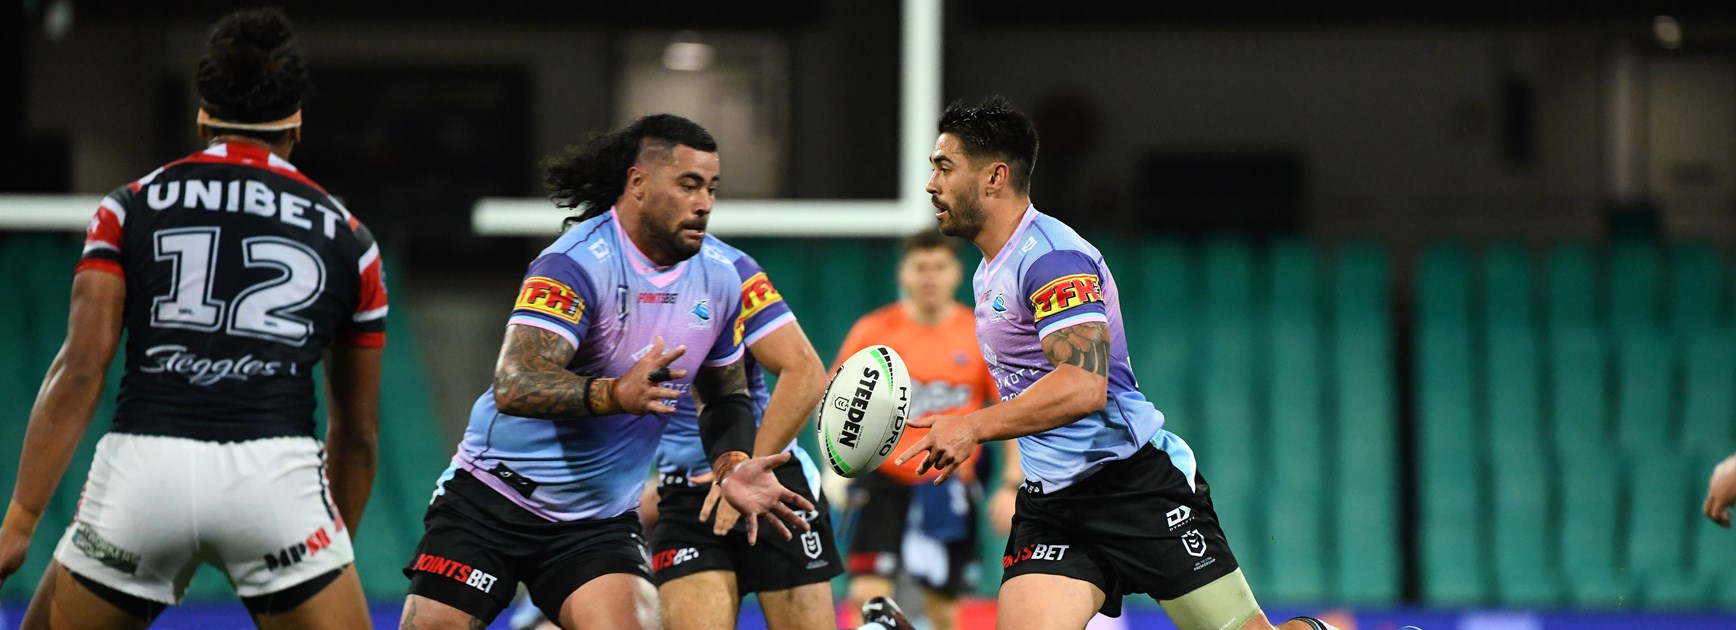 Crunch time looms for 14 off-contract Sharks as Fifita fields offer